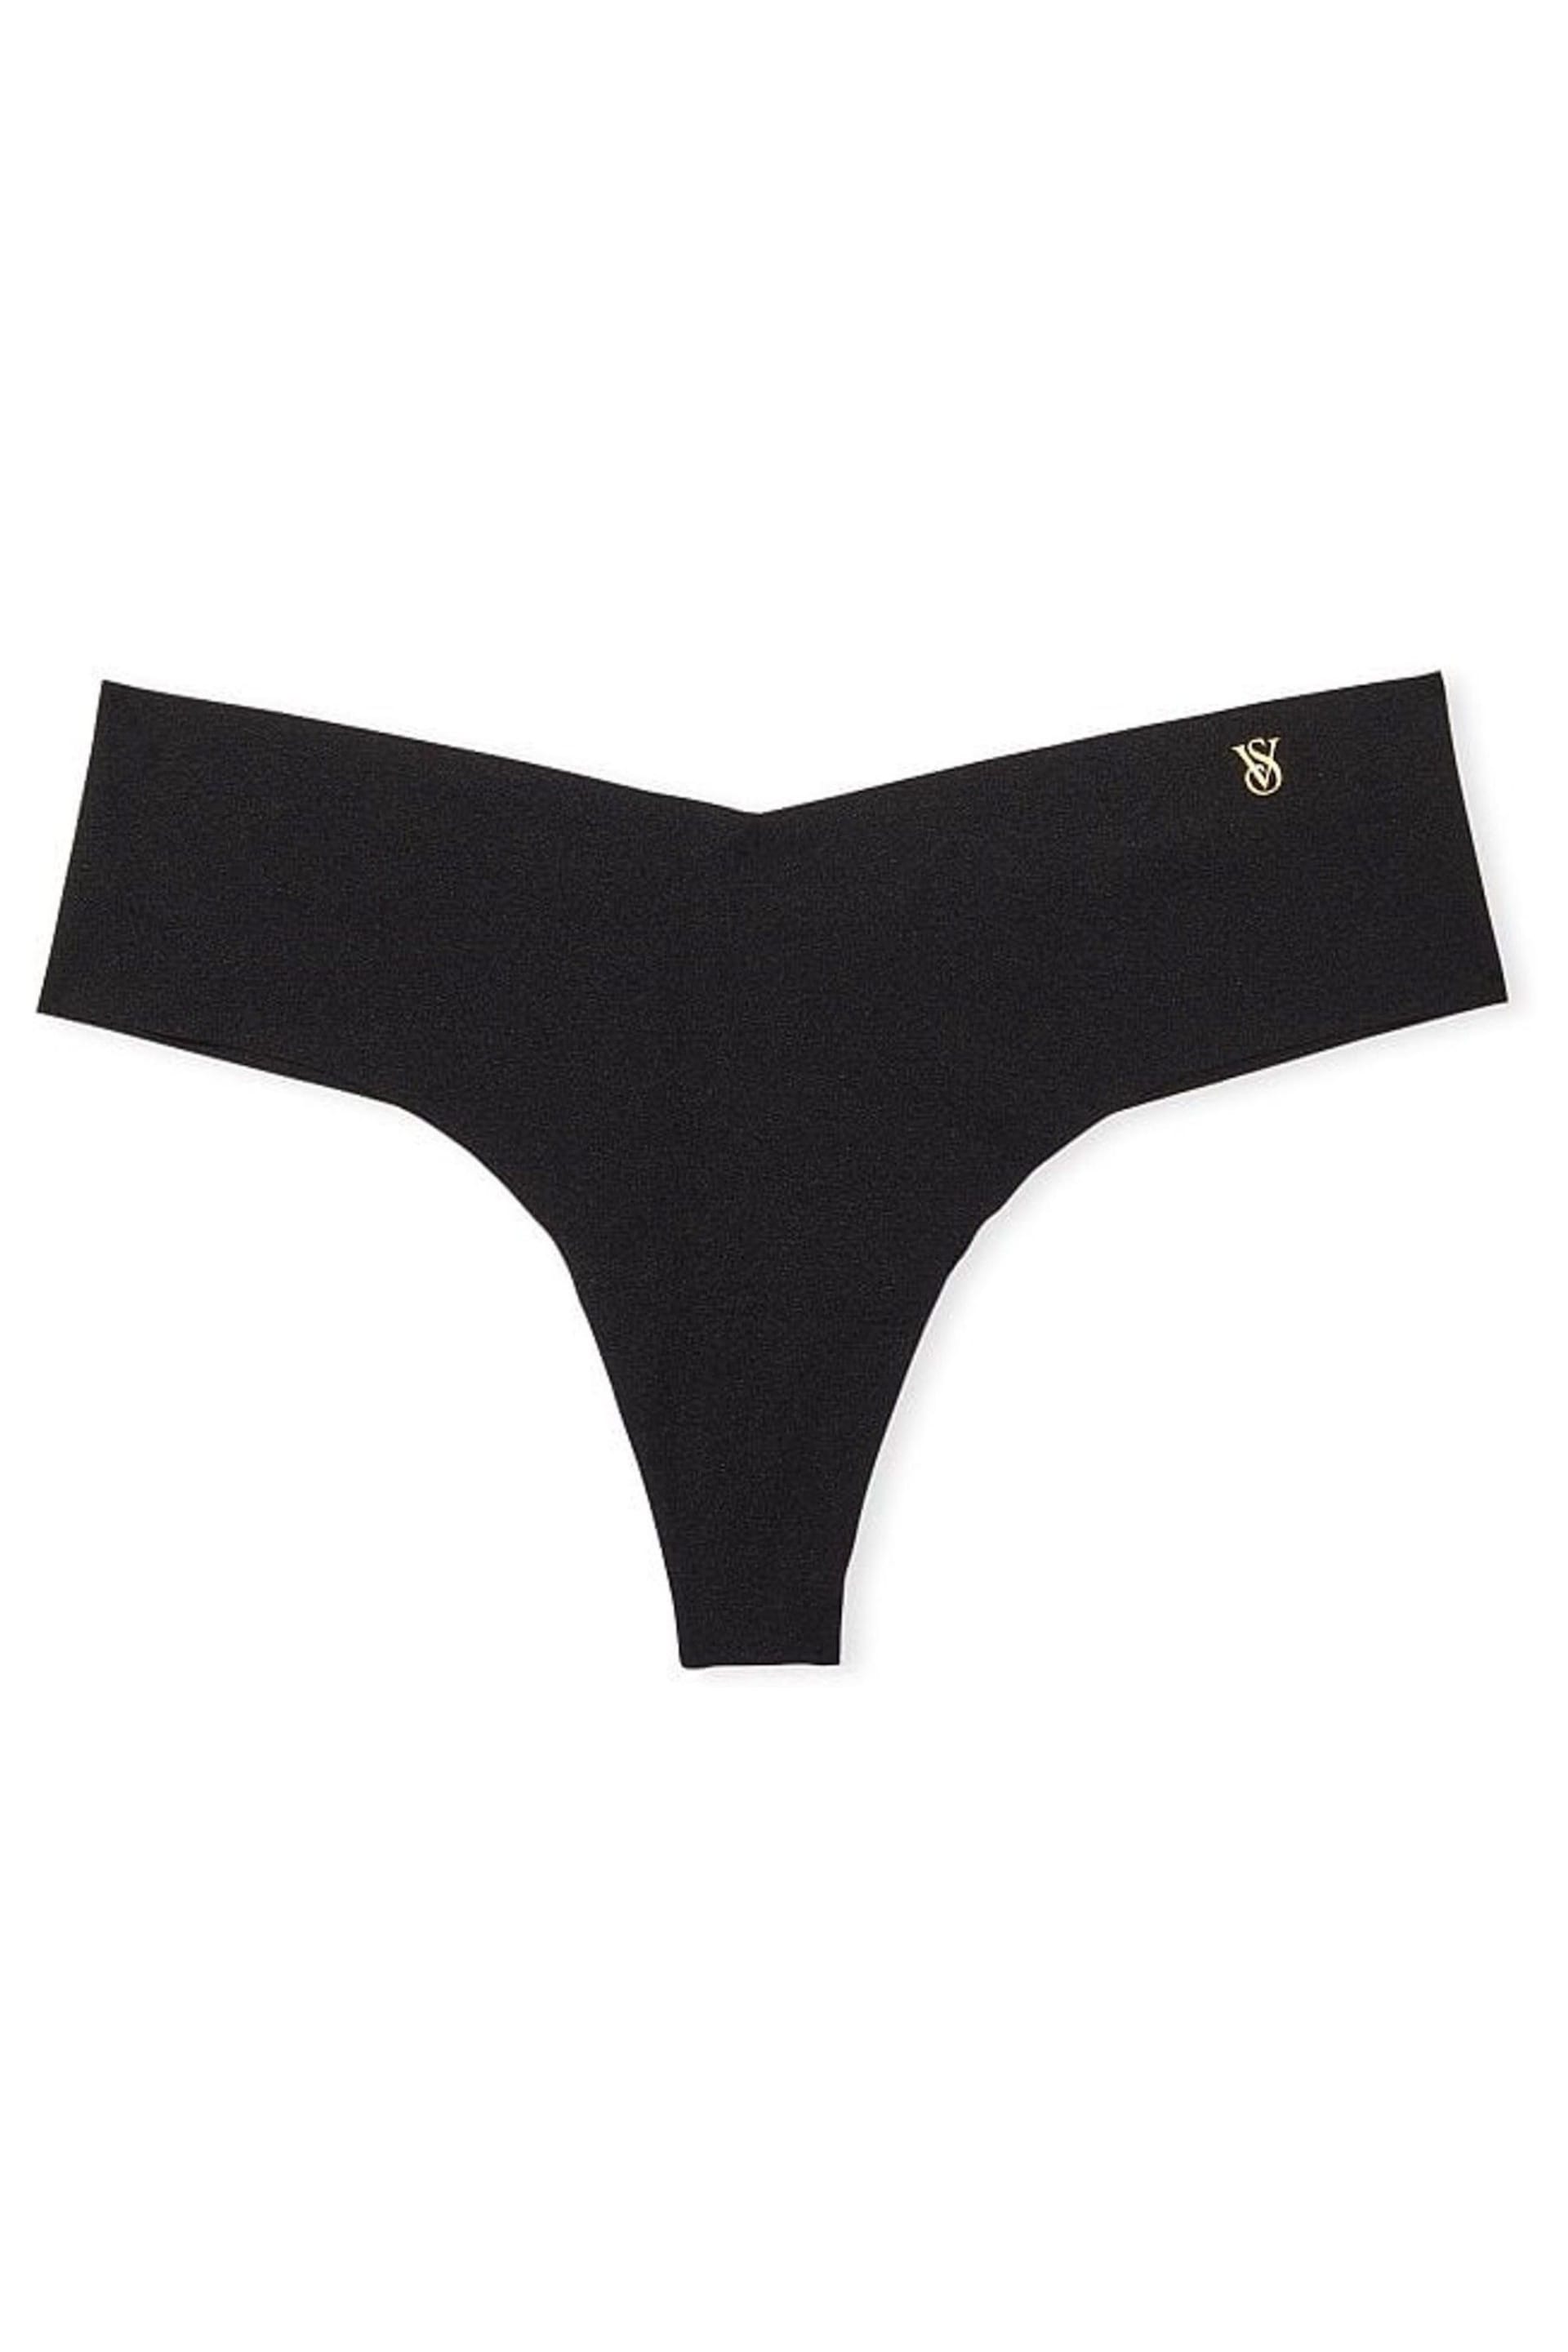 Victoria's Secret Black Thong Knickers - Image 4 of 4